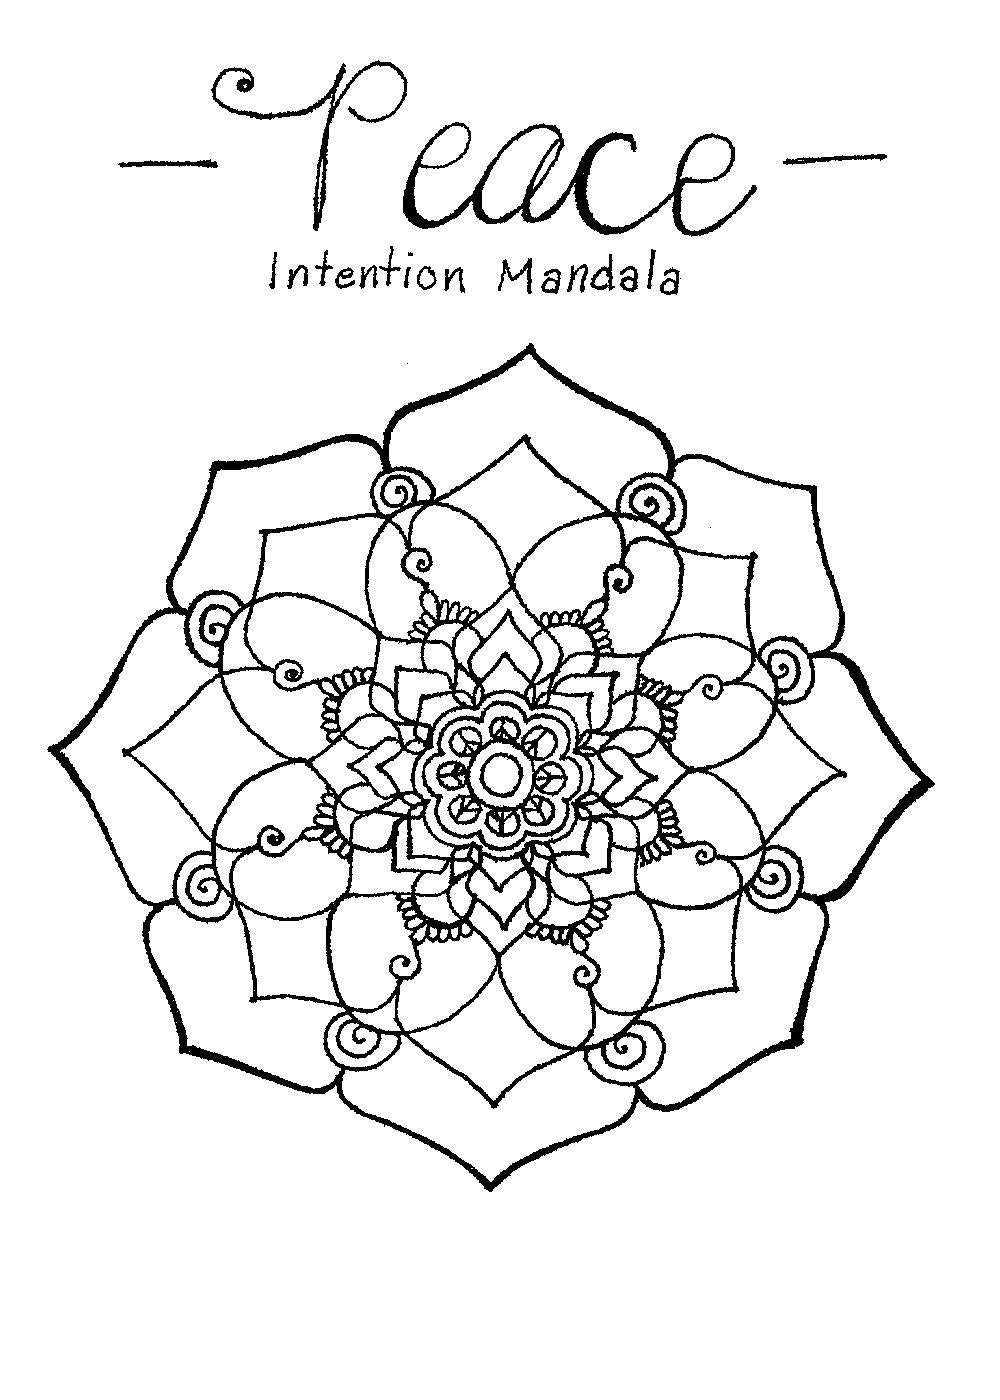 Intention Mandala Printable Poster Pack | 9 Freehand Drawings |Prosperity|Health| PDF Instant Digital Download | Home and Office Wall Art